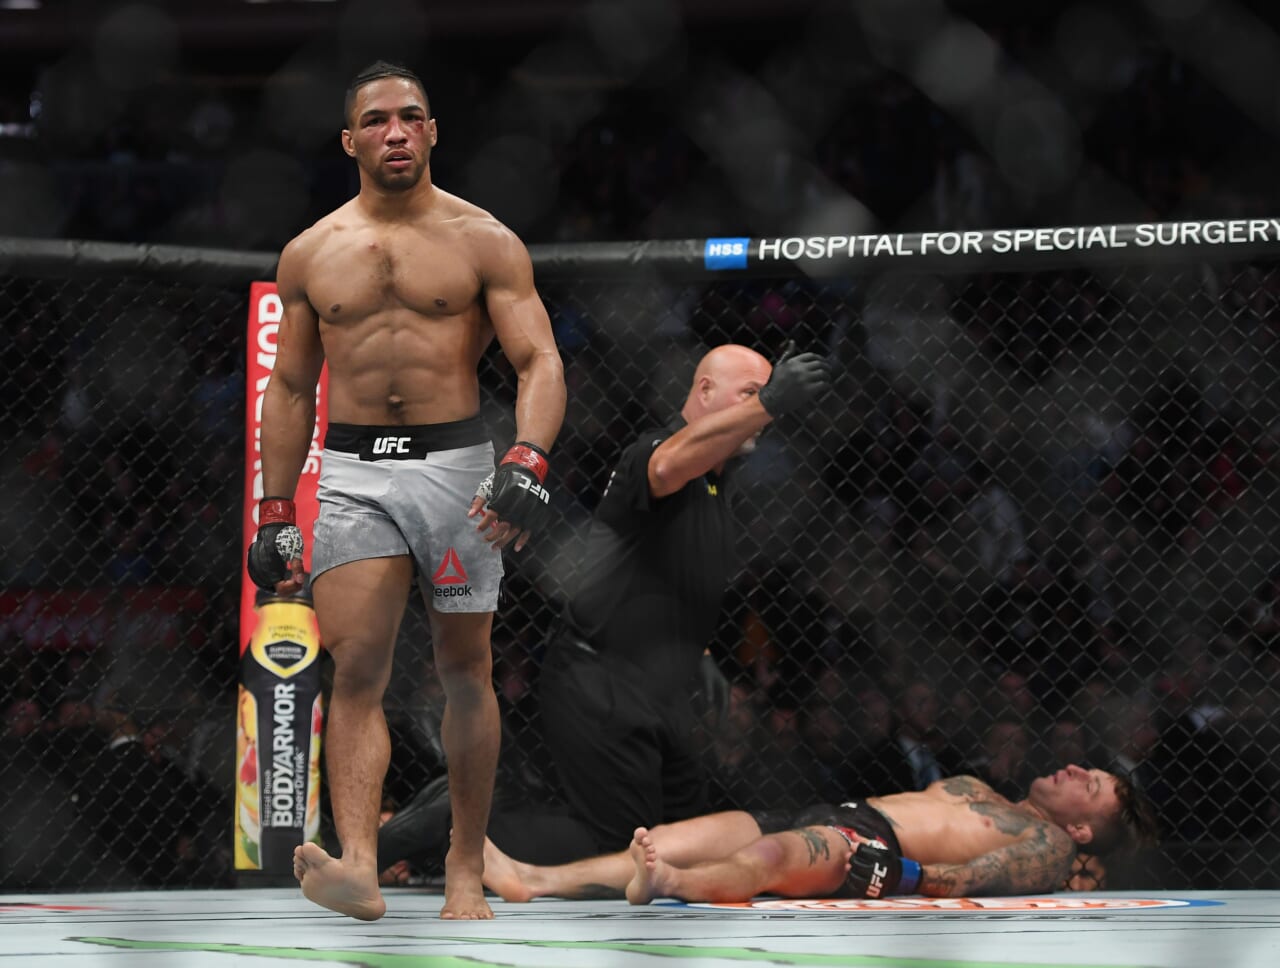 After UFC release, what’s next for Kevin Lee?